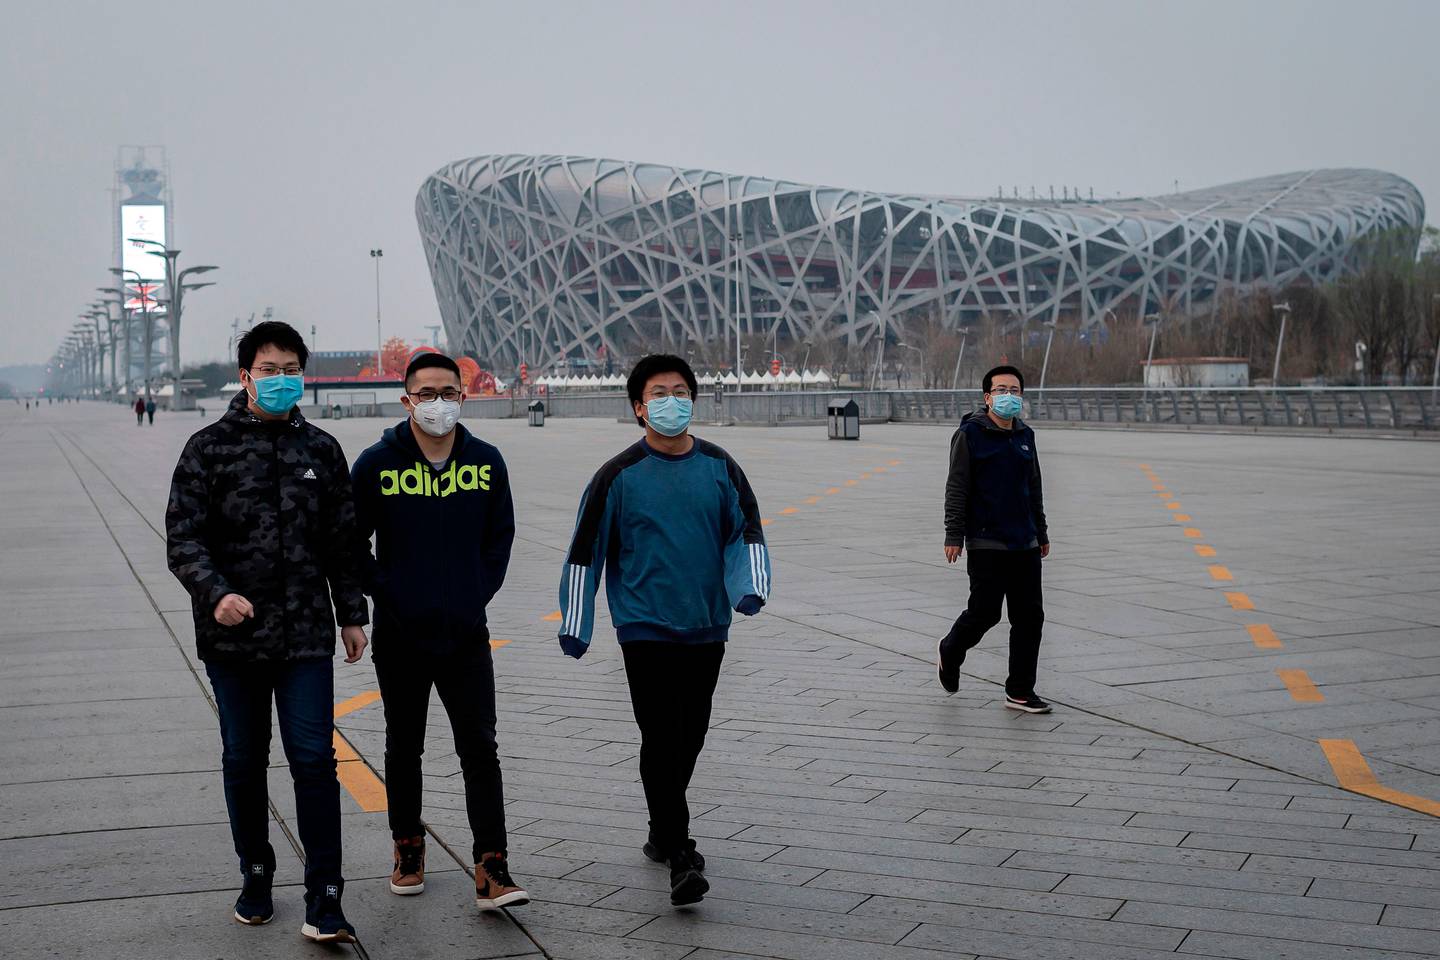 People wearing facemasks amid concerns of the COVID-19 coronavirus walk at the Olympic park outside the national 'Birds Nest' stadium (R), the site of the 2008 Beijing Olympics, in Beijing on March 24, 2020. - The 2020 Tokyo Olympics have been postponed to no later than the summer of 2021 because of the coronavirus pandemic sweeping the globe, the International Olympic Committee announced on March 24. (Photo by NICOLAS ASFOURI / AFP)